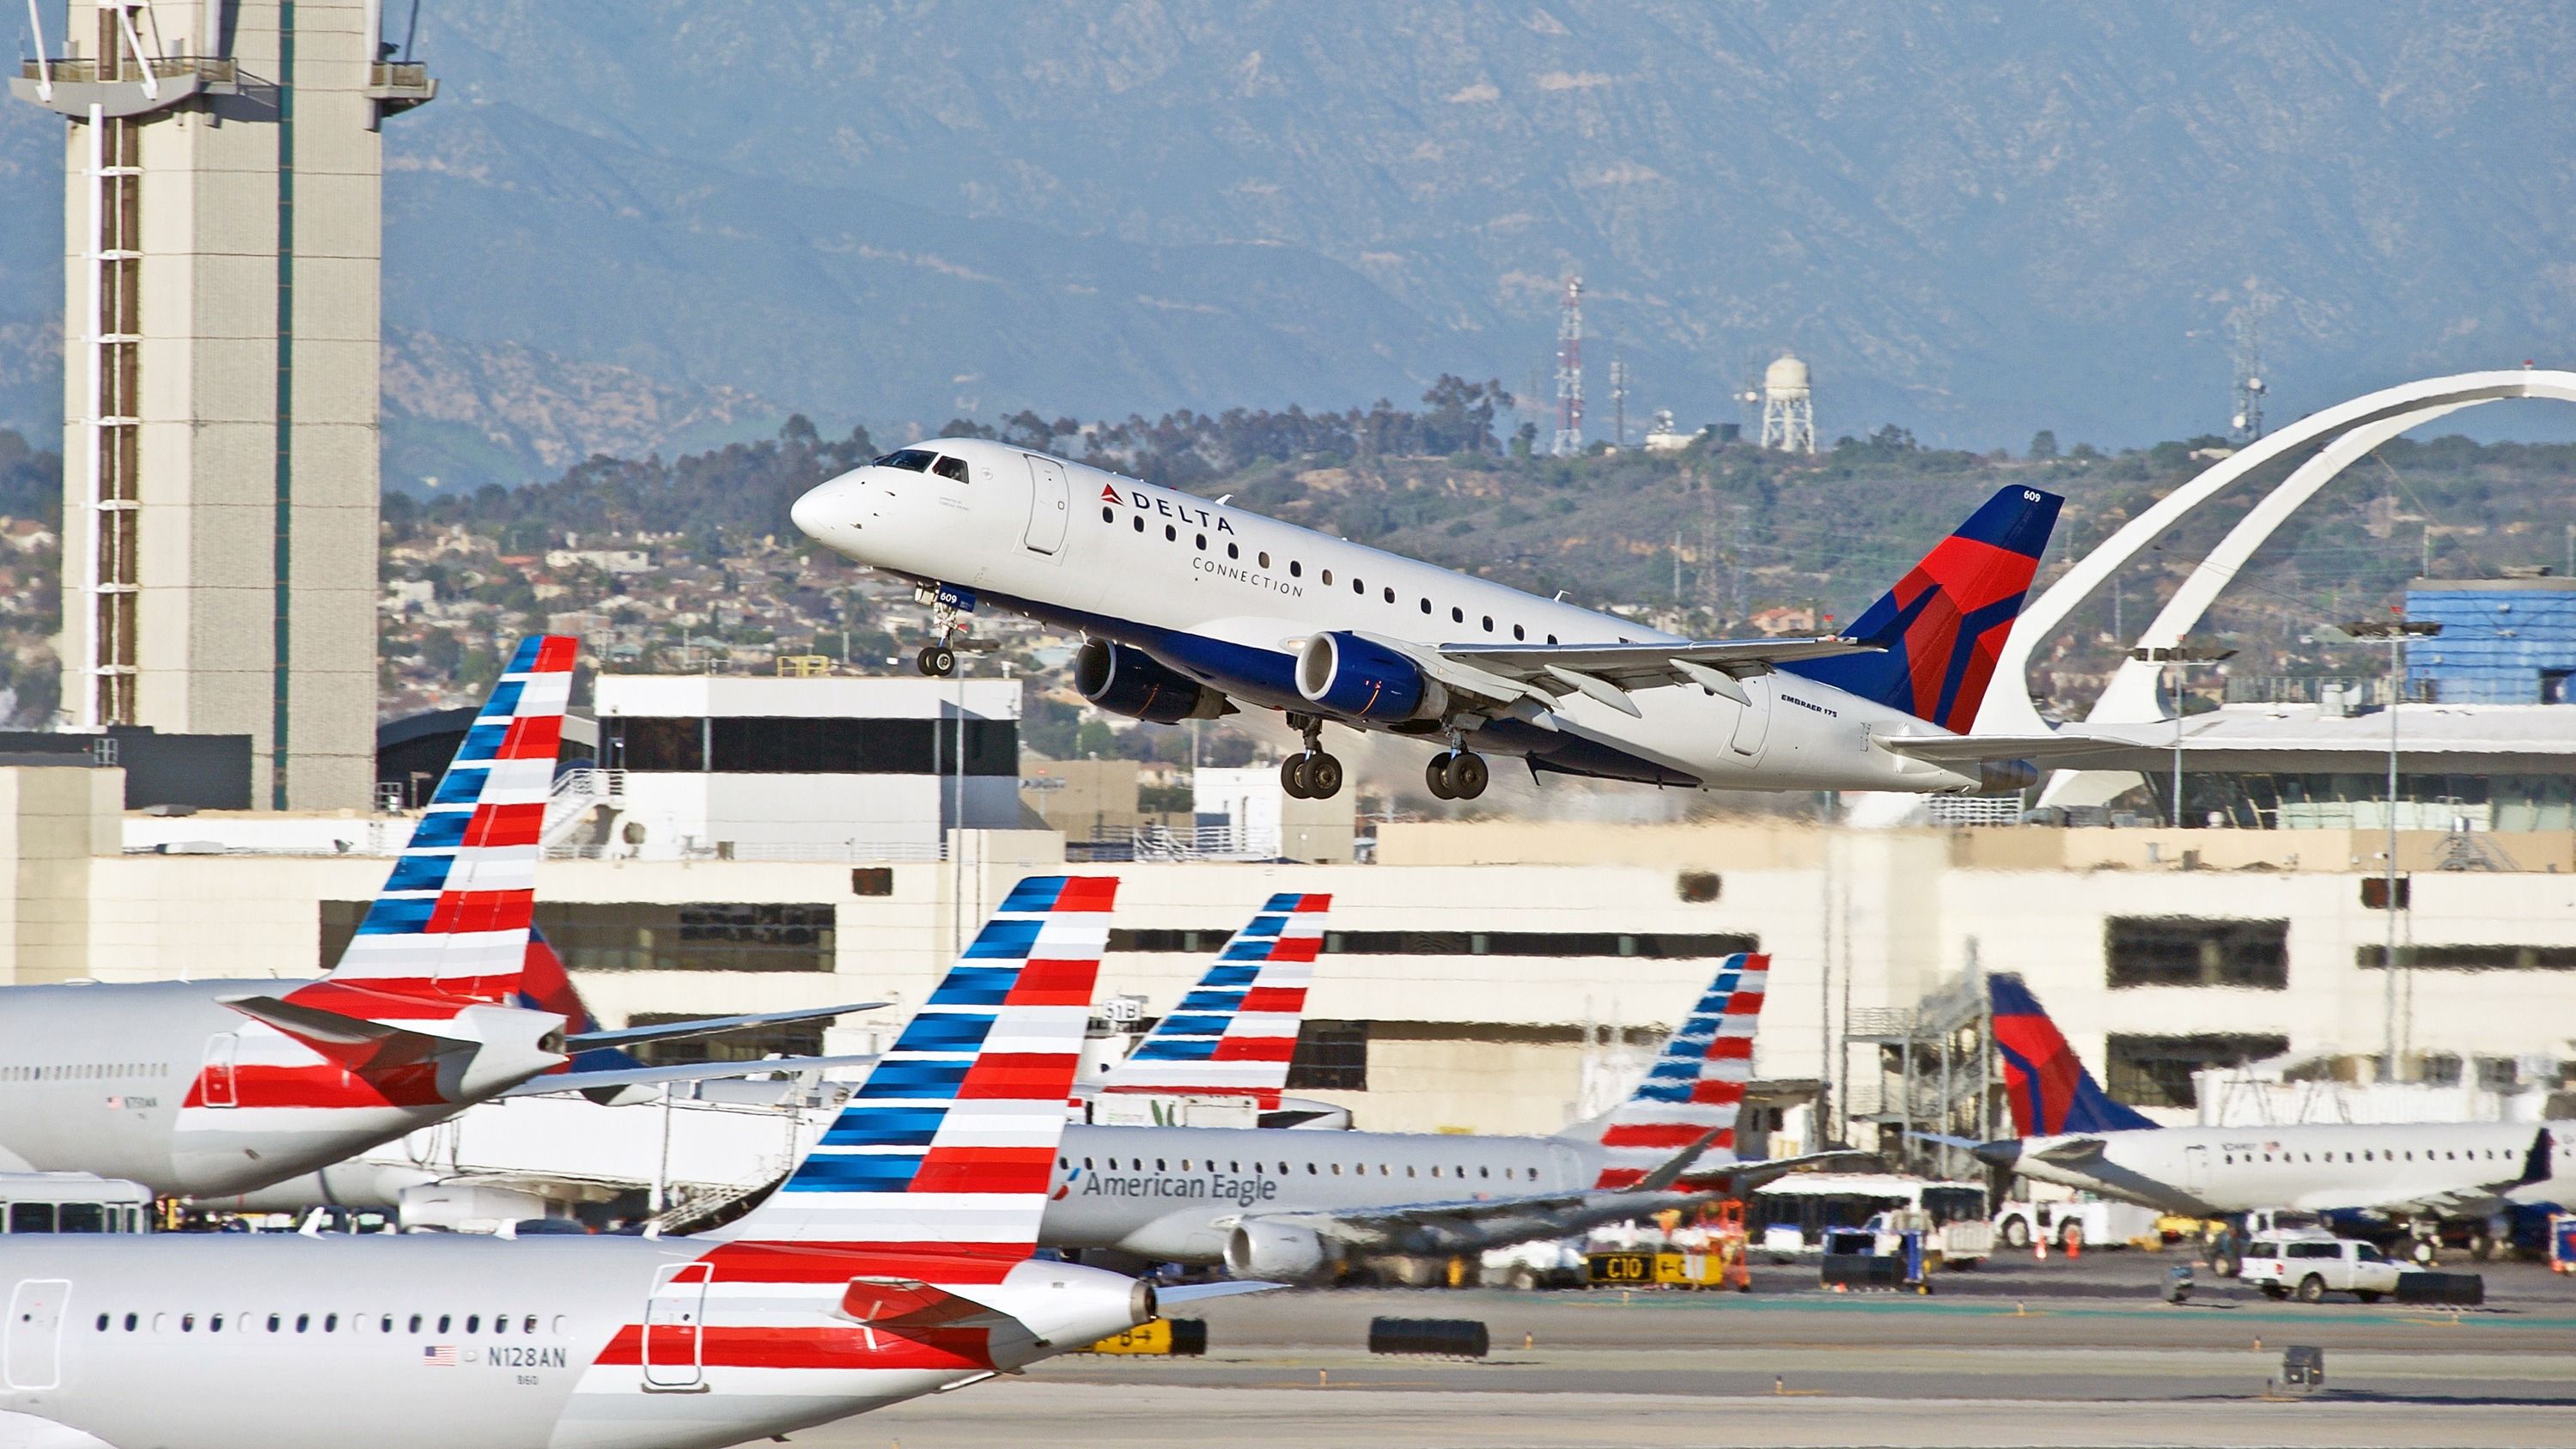 American Airlines and Delta Air Lines aircraft at Los Angeles International Airport LAX shutterstock_589877828